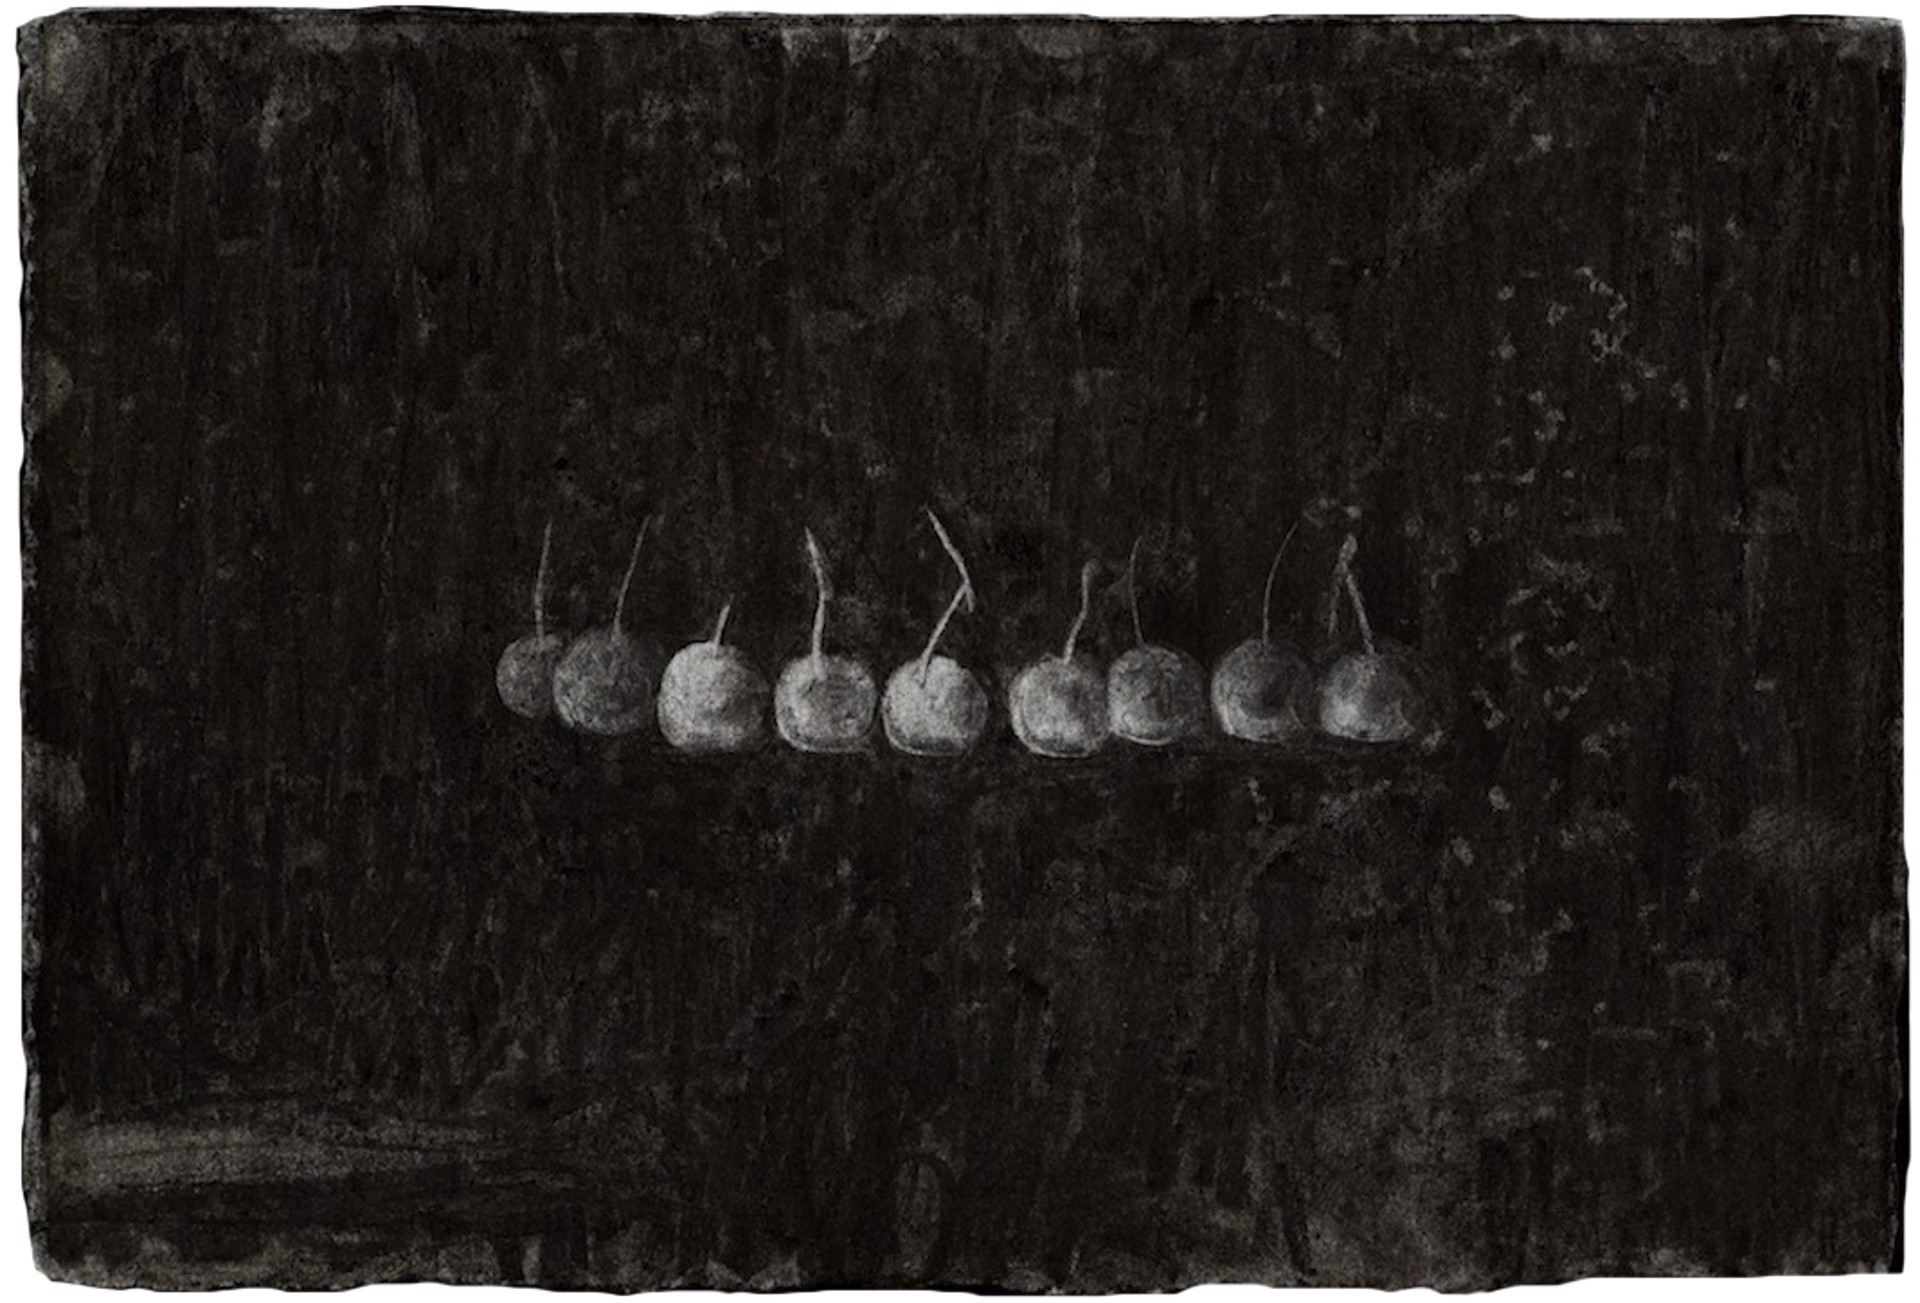 Untitled, Black Drawing #1 by Kathy Moss